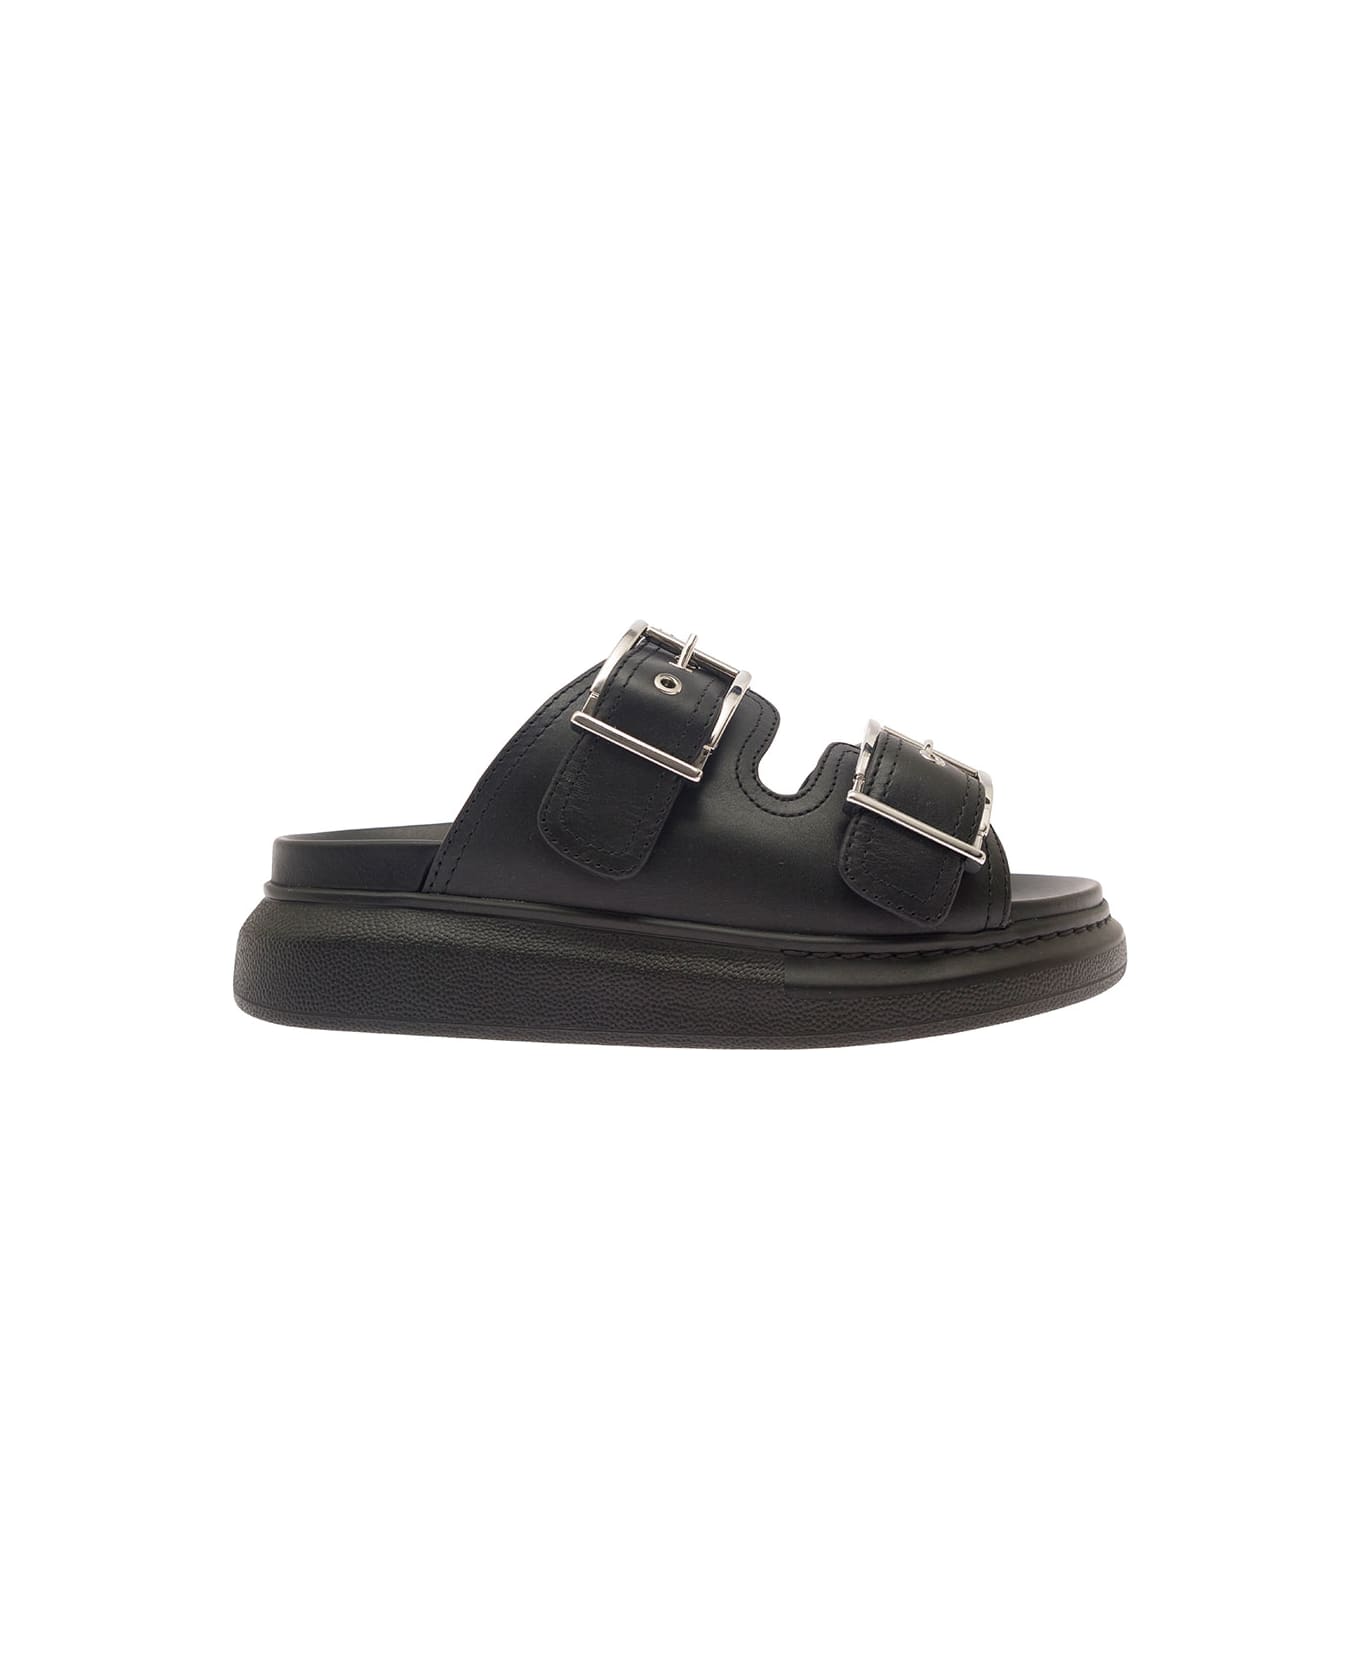 Alexander McQueen Black Sandals With Double-straps In Leather Woman - Black